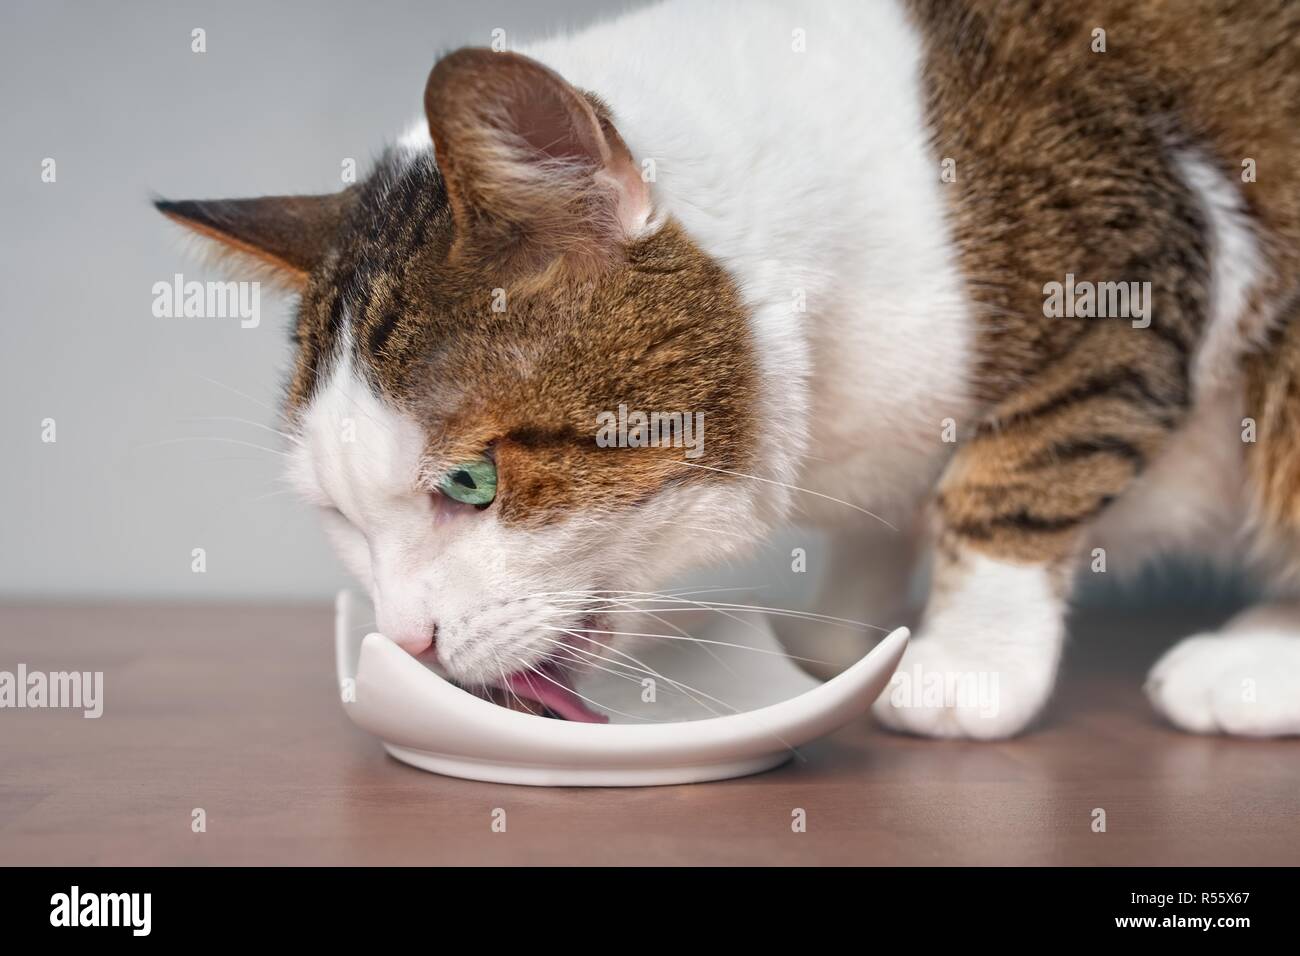 Close-up of a tabby cat eating food from a plate. Stock Photo